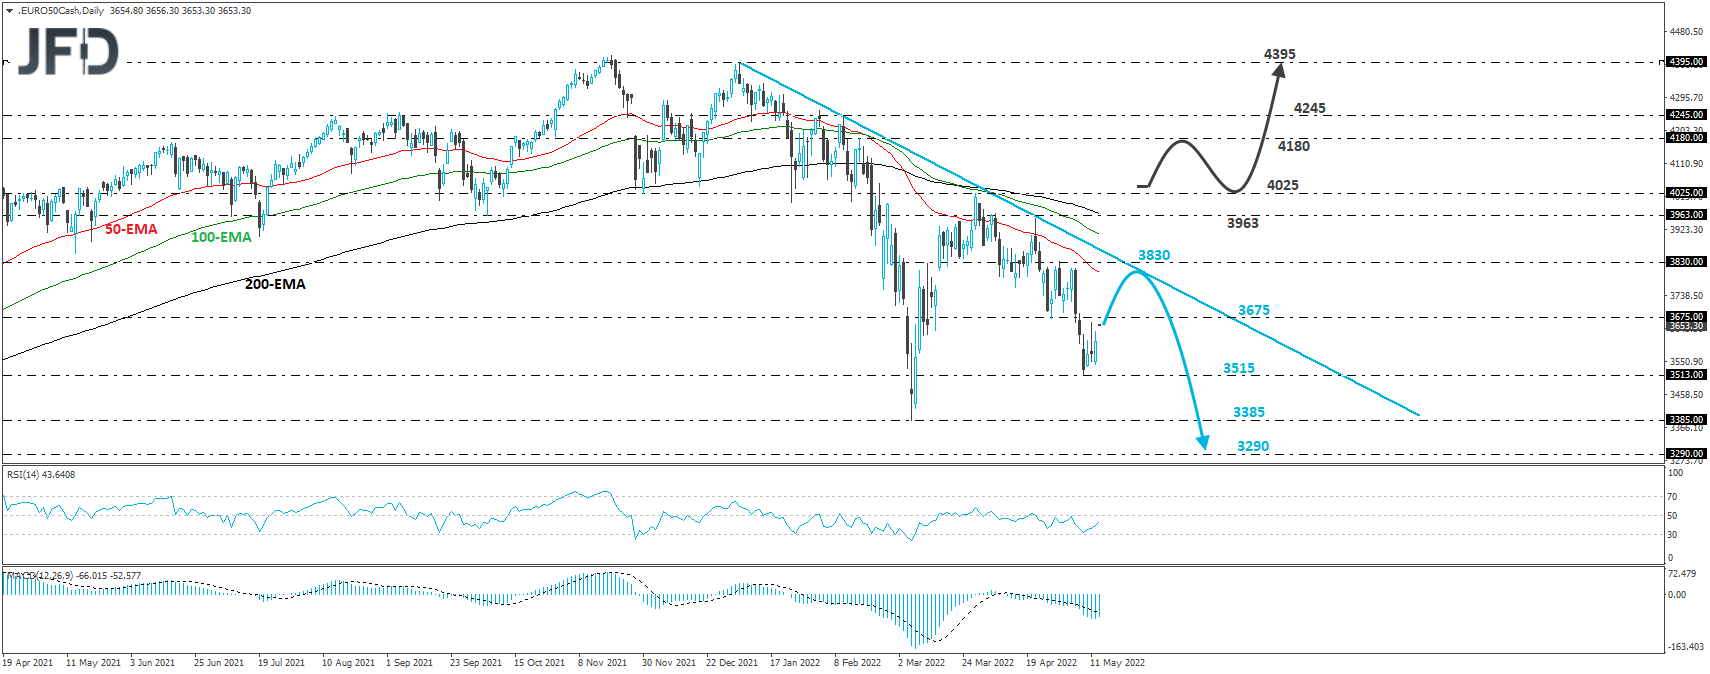 Euro Stoxx 50 cash index daily chart technical analysis.